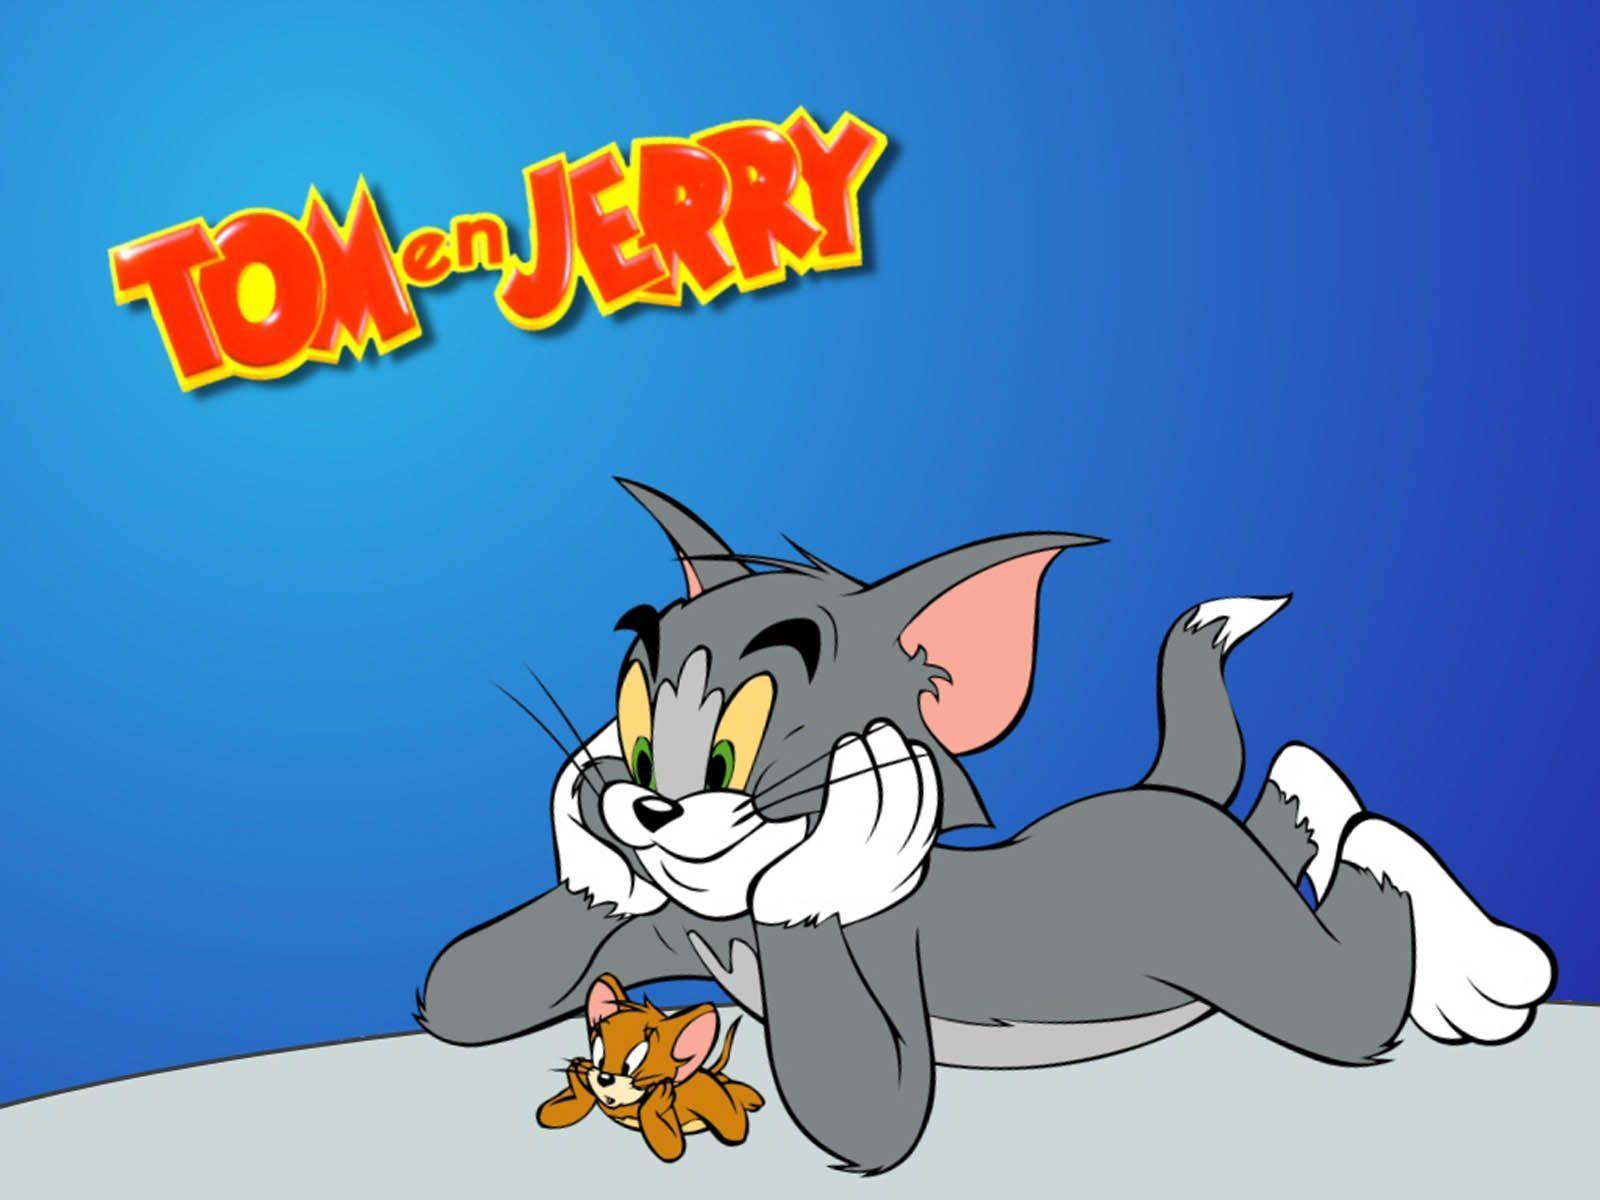 Tom & Jerry Wallpapers - Wallpaper Cave